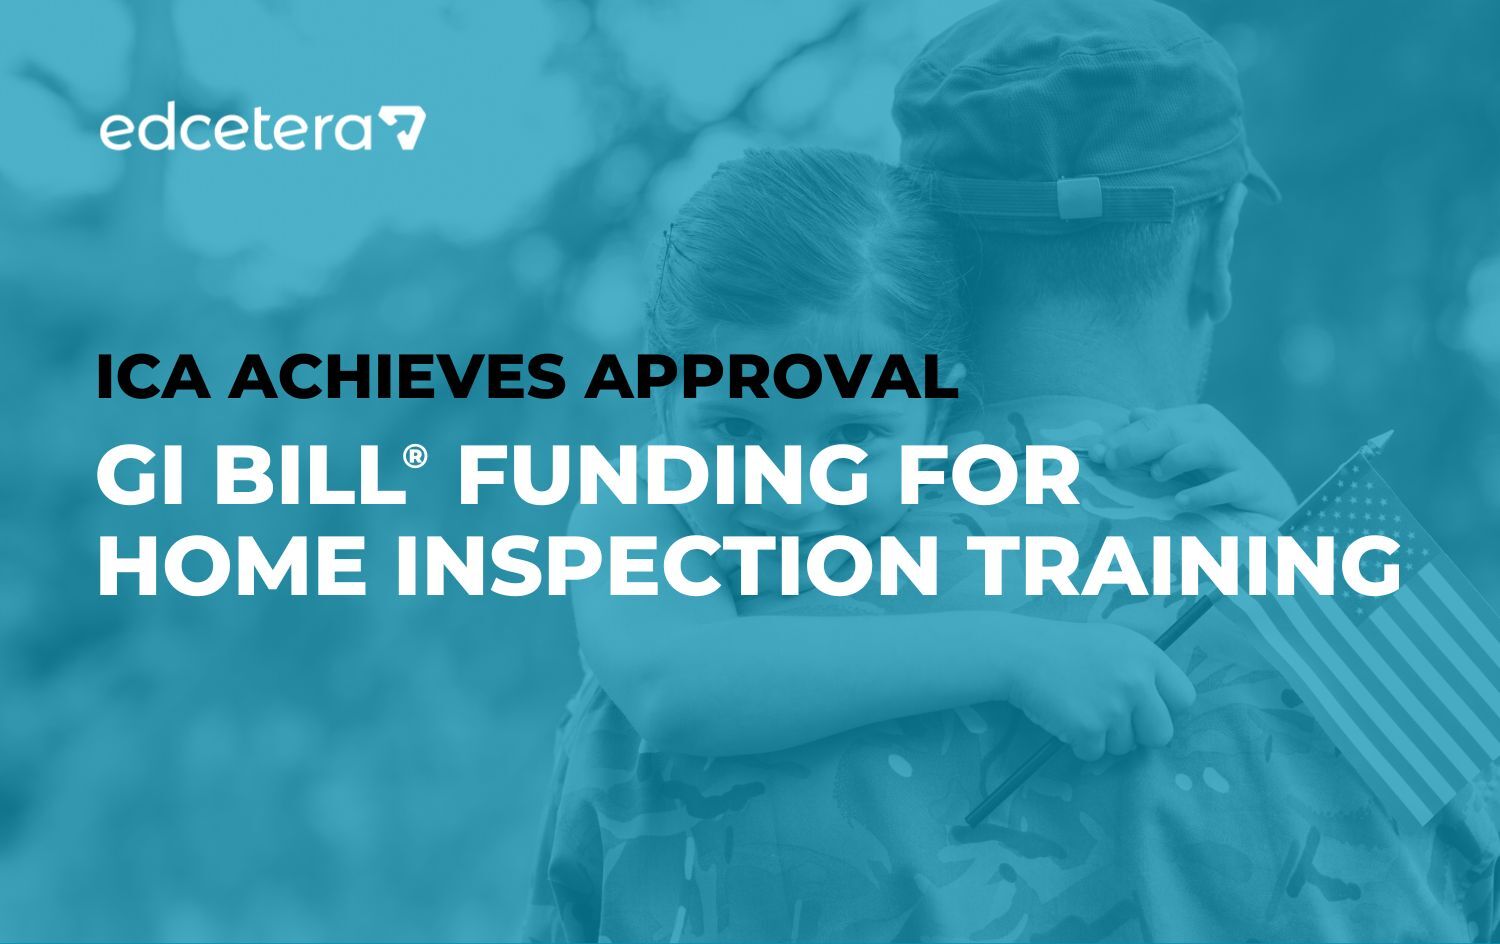 ICA banner announcing GI Bill funding approval for its home inspection training courses